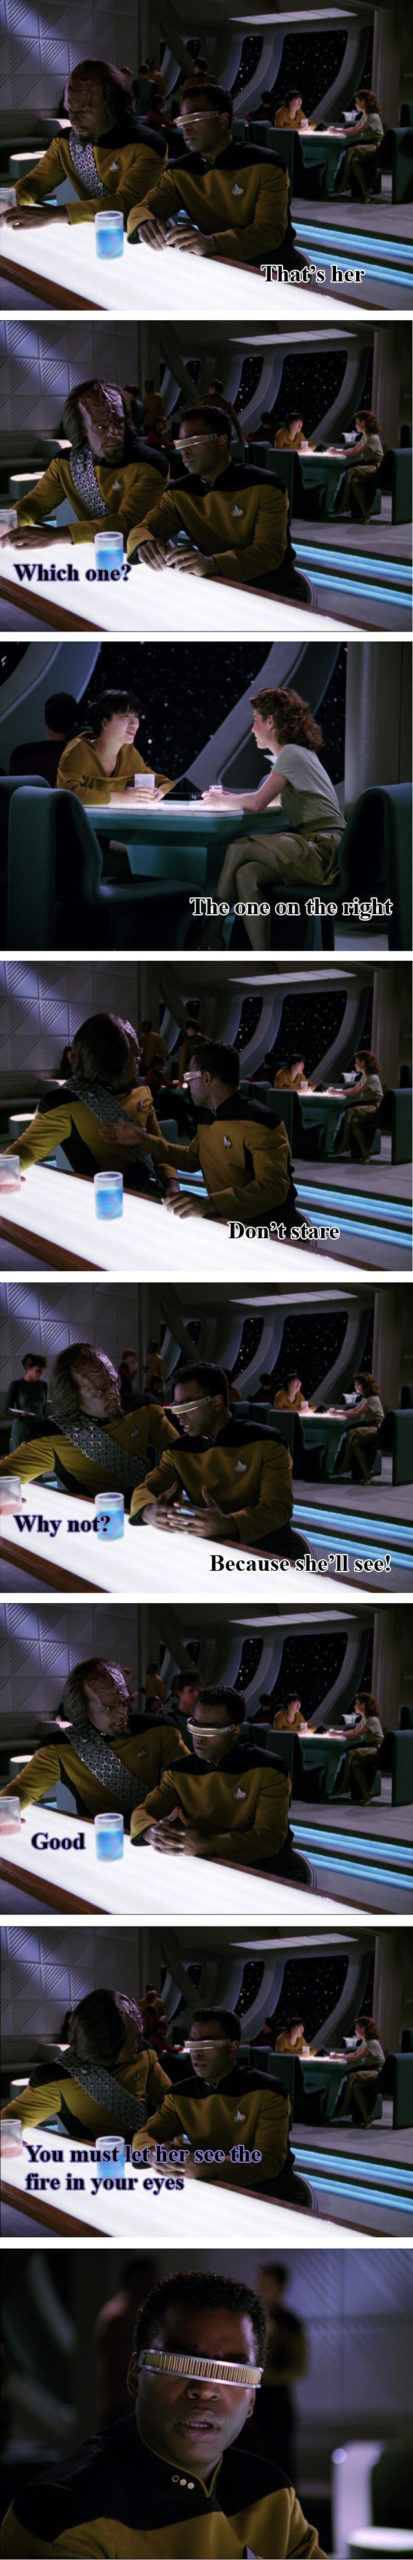 Thanks+Worf.+That+helps+a+lot.